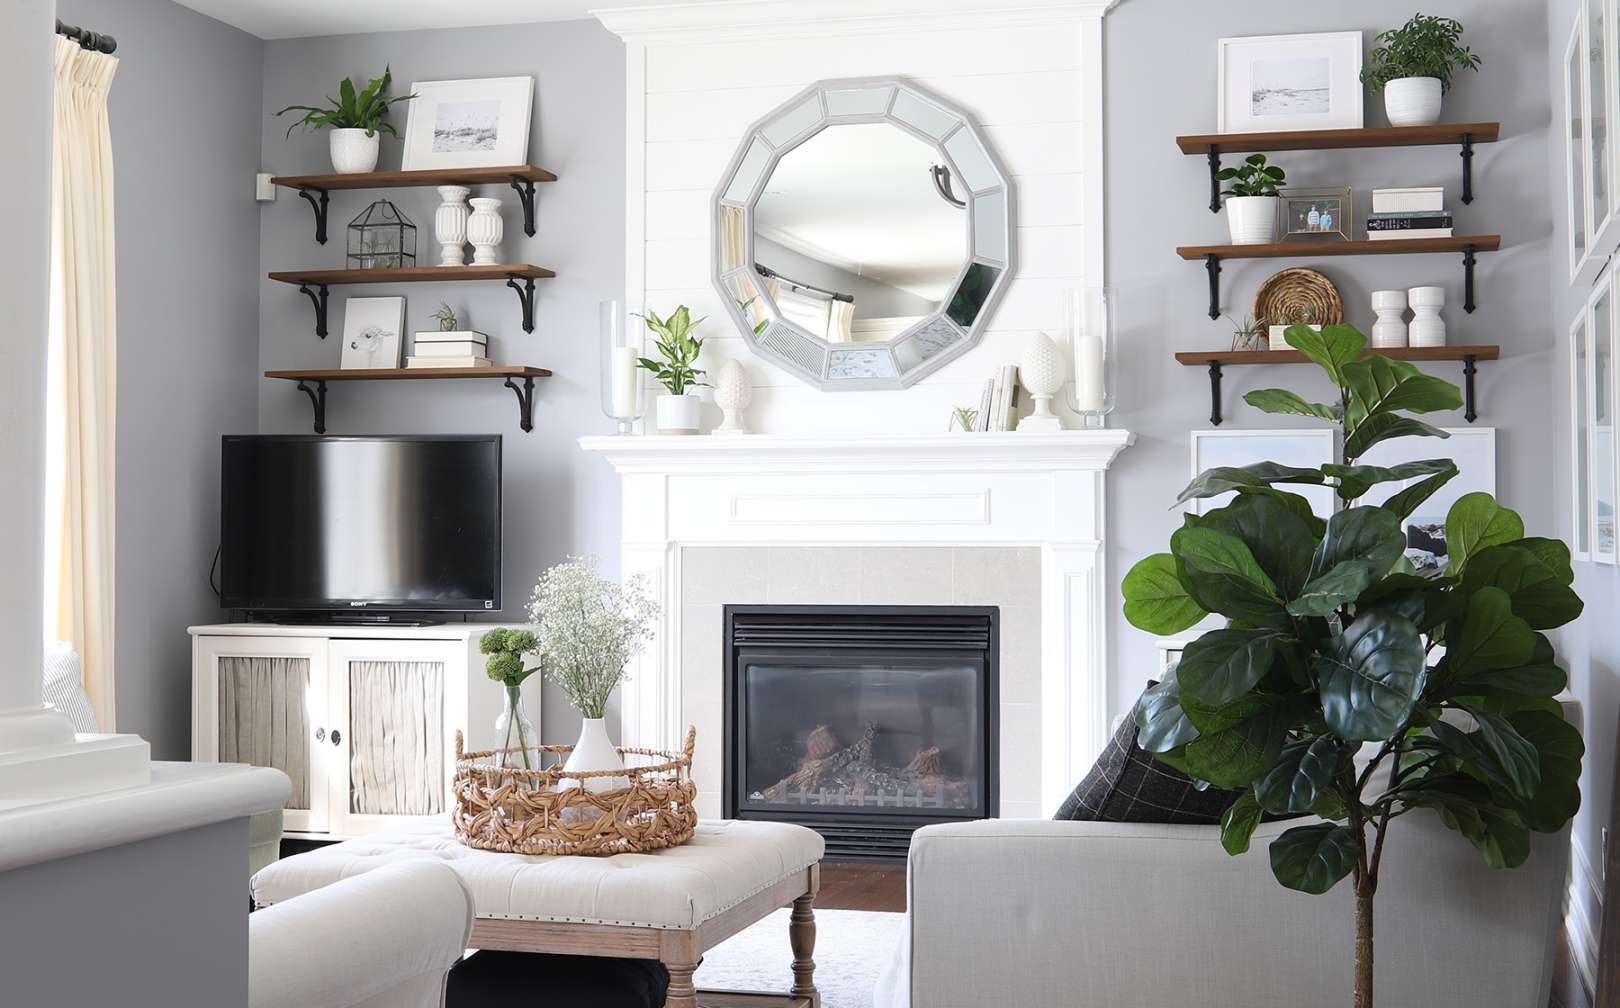 How to decorate a fireplace wall without built-ins - Willow Bloom Home